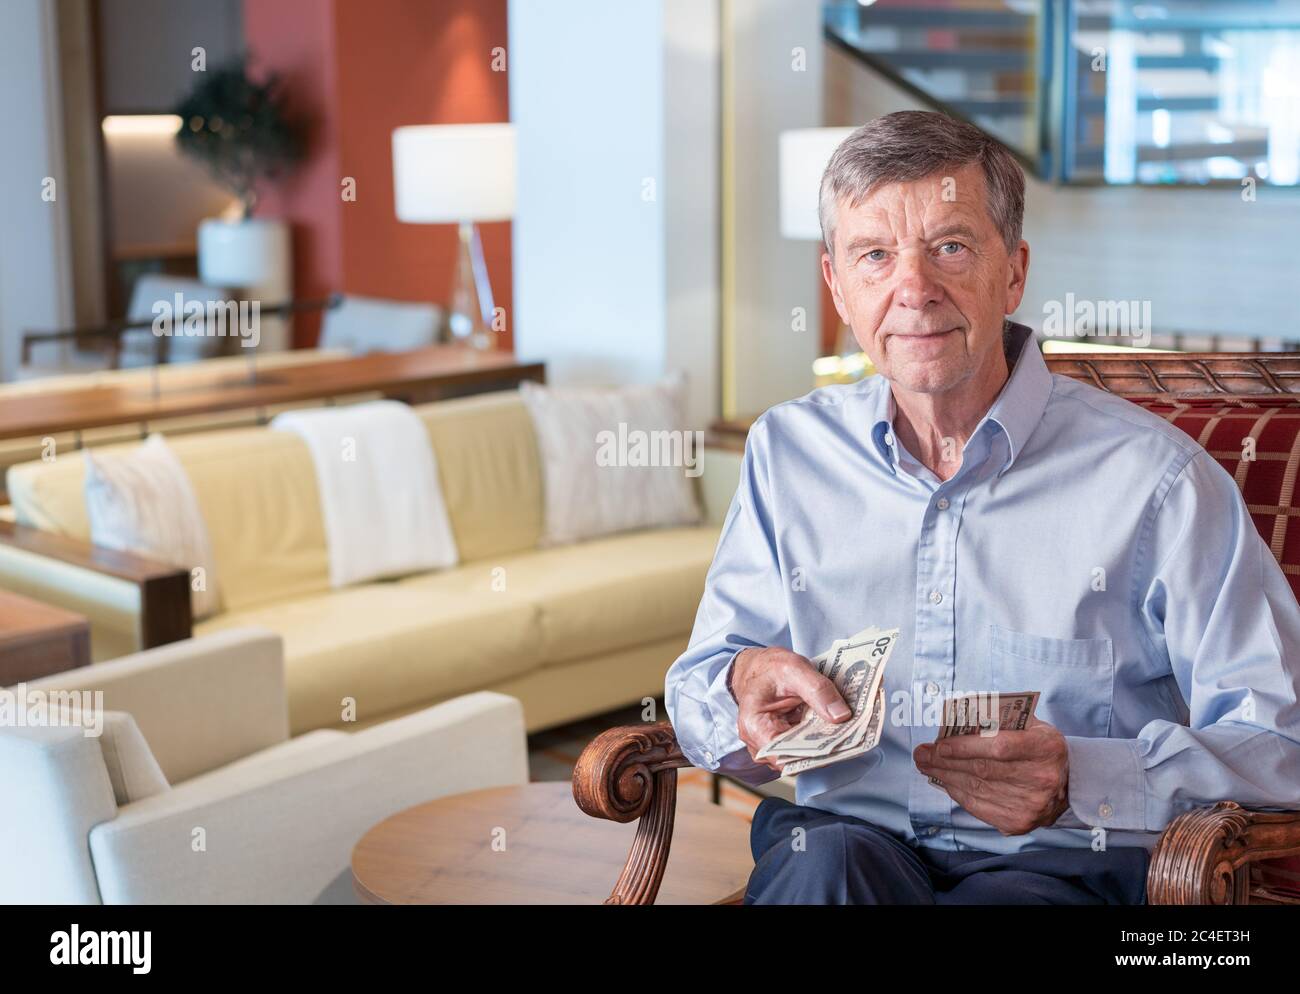 Senior caucasian man holding some US dollar bills as if handing them to the viewer. Composite into upmarket lounge of hotel or cruise ship Stock Photo